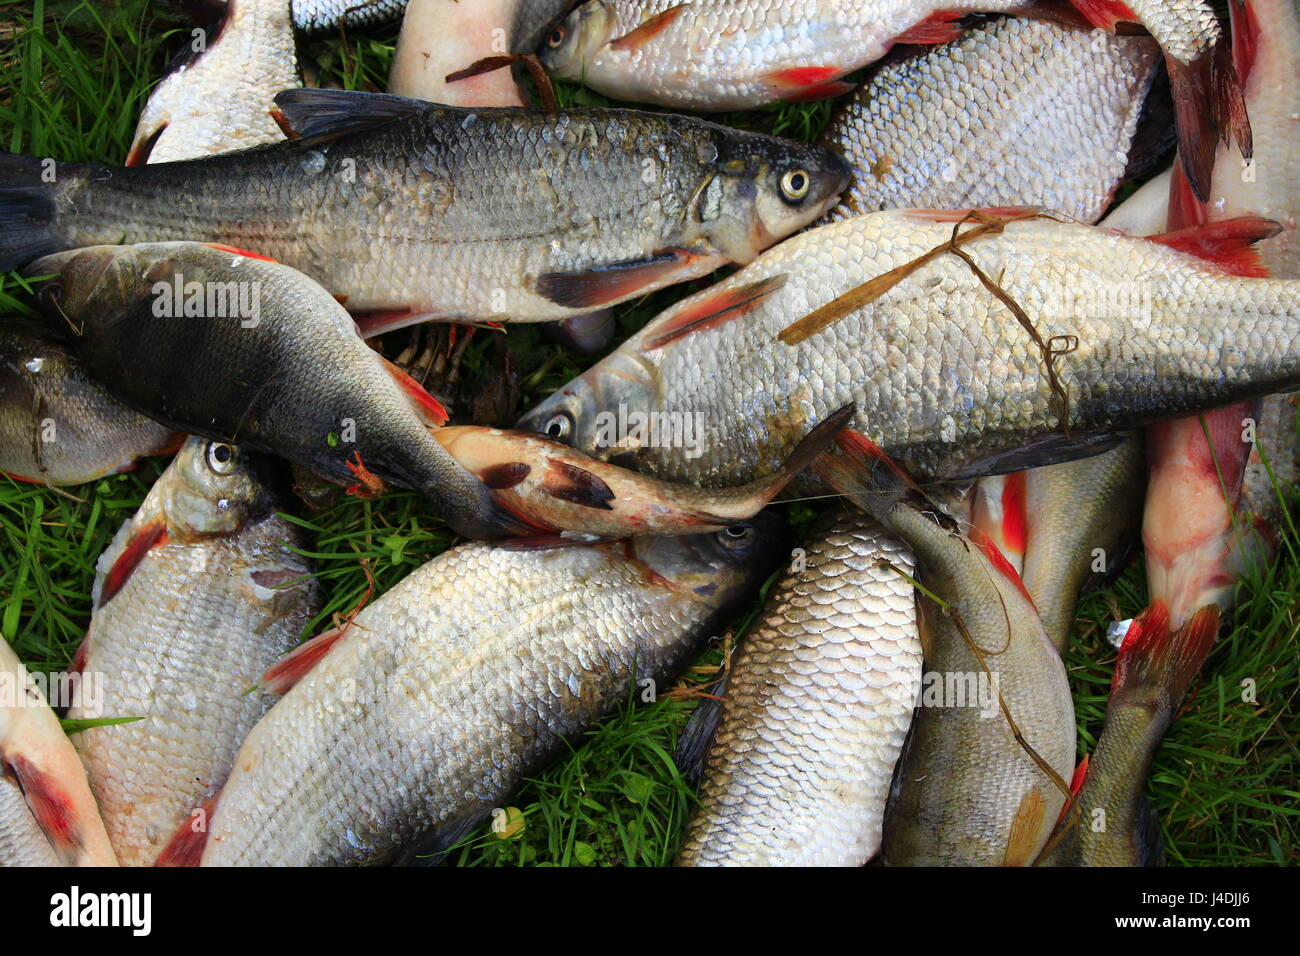 Caught fishes perches common nases breames and crucian on the grass. Rich catch of fishes Stock Photo